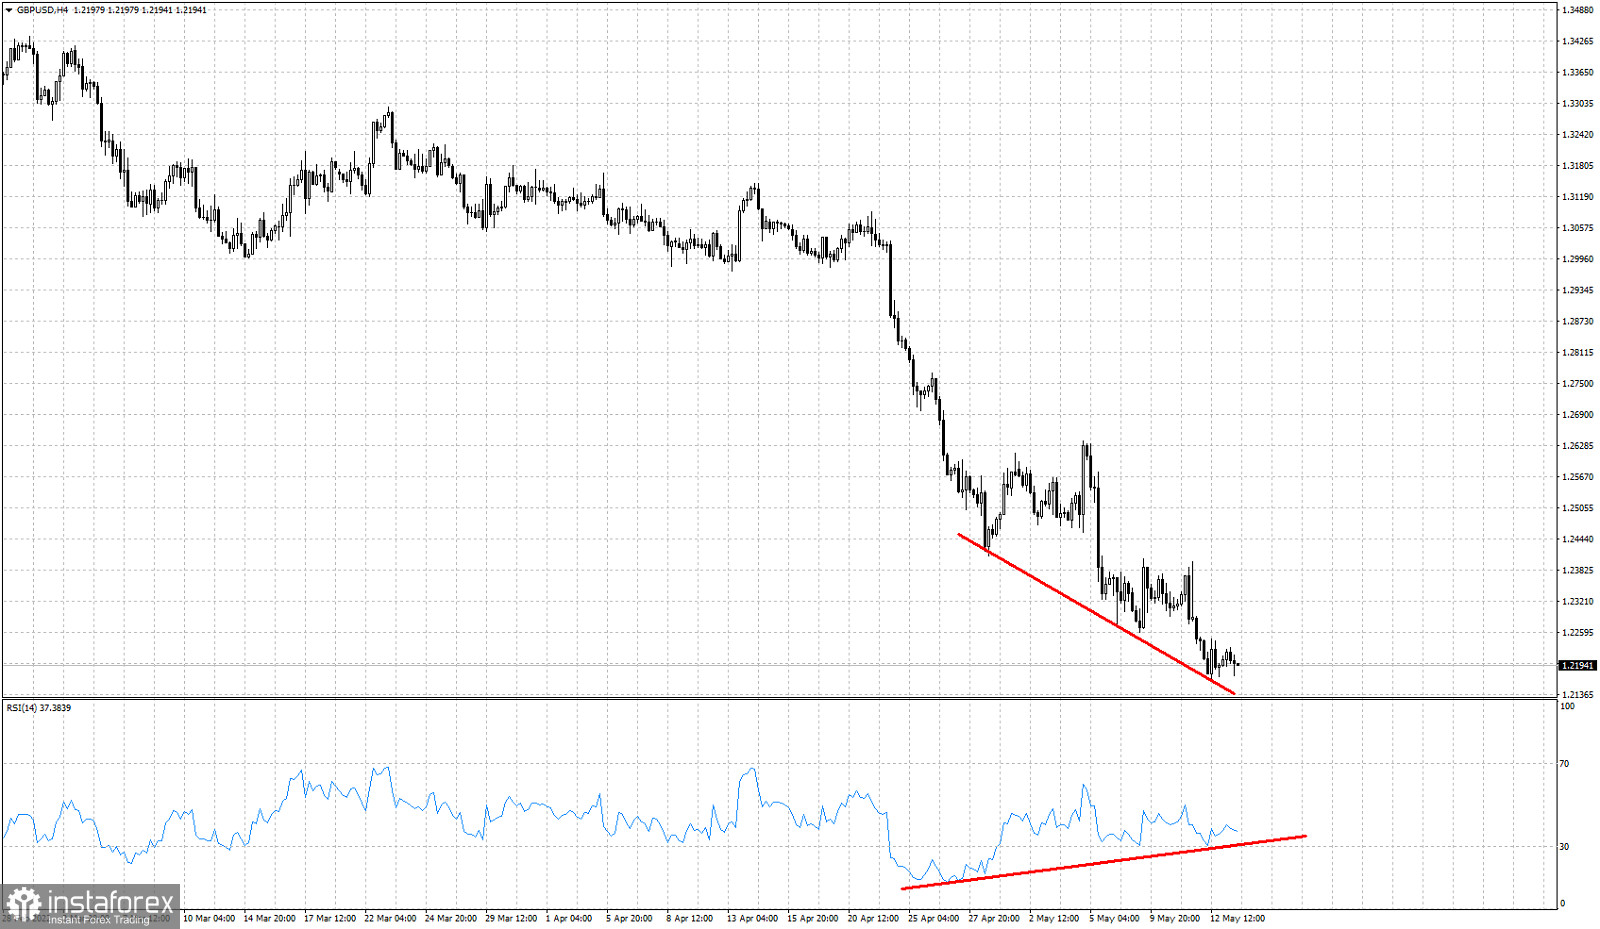 GBPUSD justifies at least a short-term bounce.